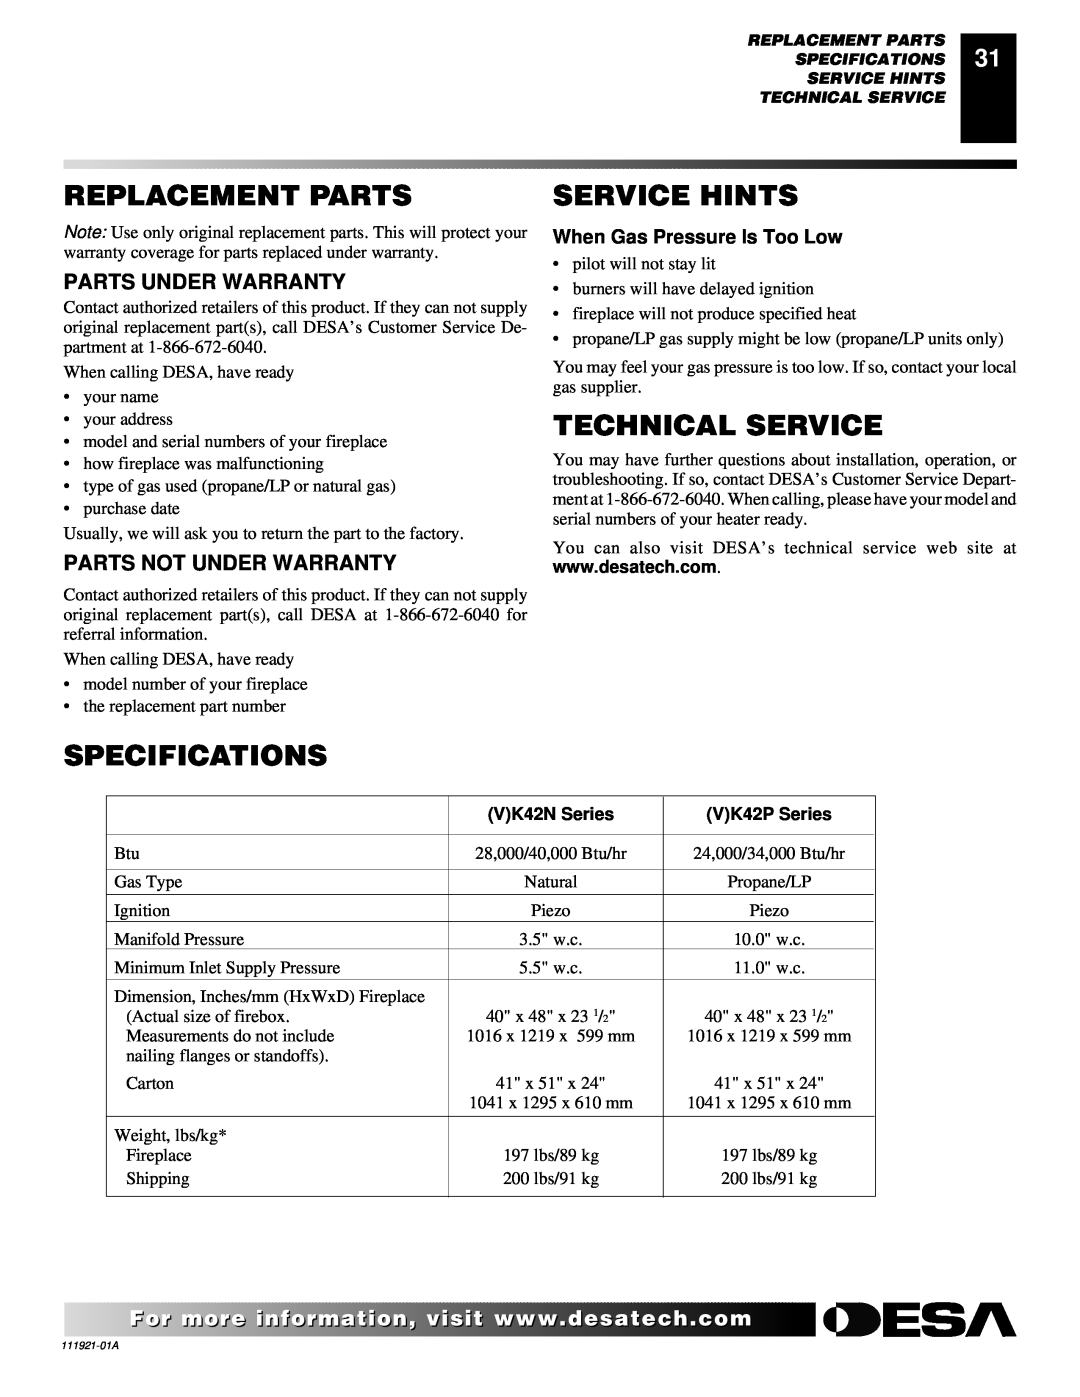 Desa (V)K42N installation manual Replacement Parts, Service Hints, Technical Service, Specifications, Parts Under Warranty 